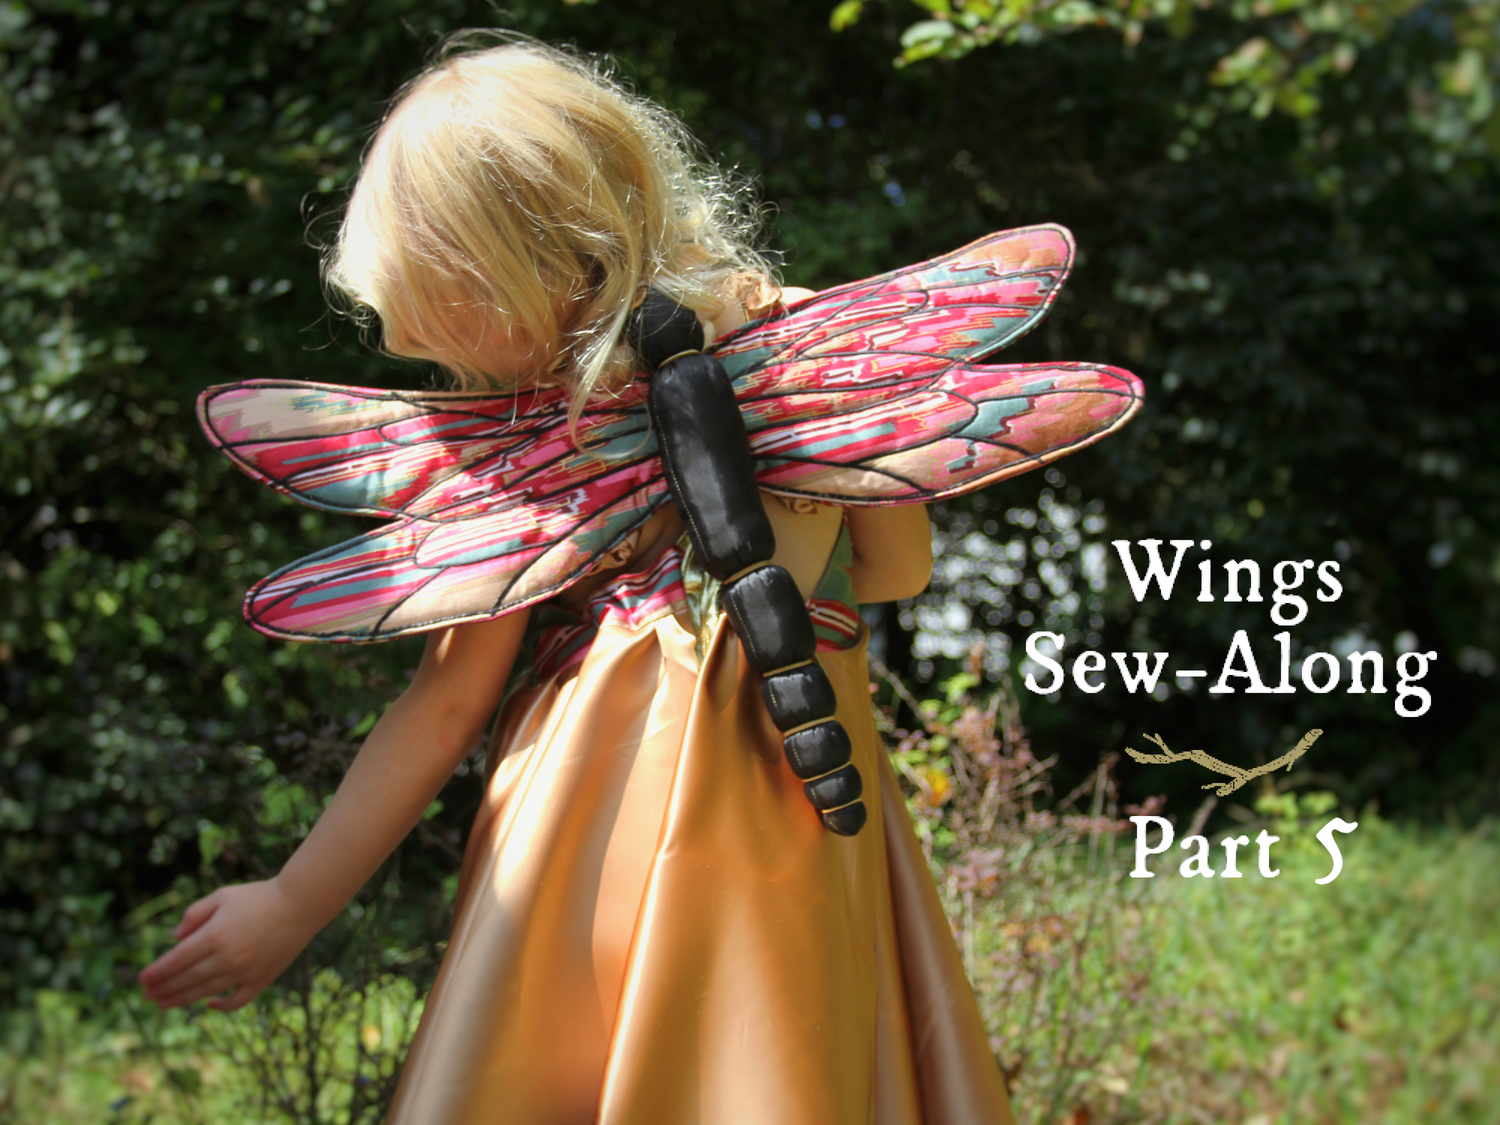 Wings Sew-Along: Part 5 - Straps and Body